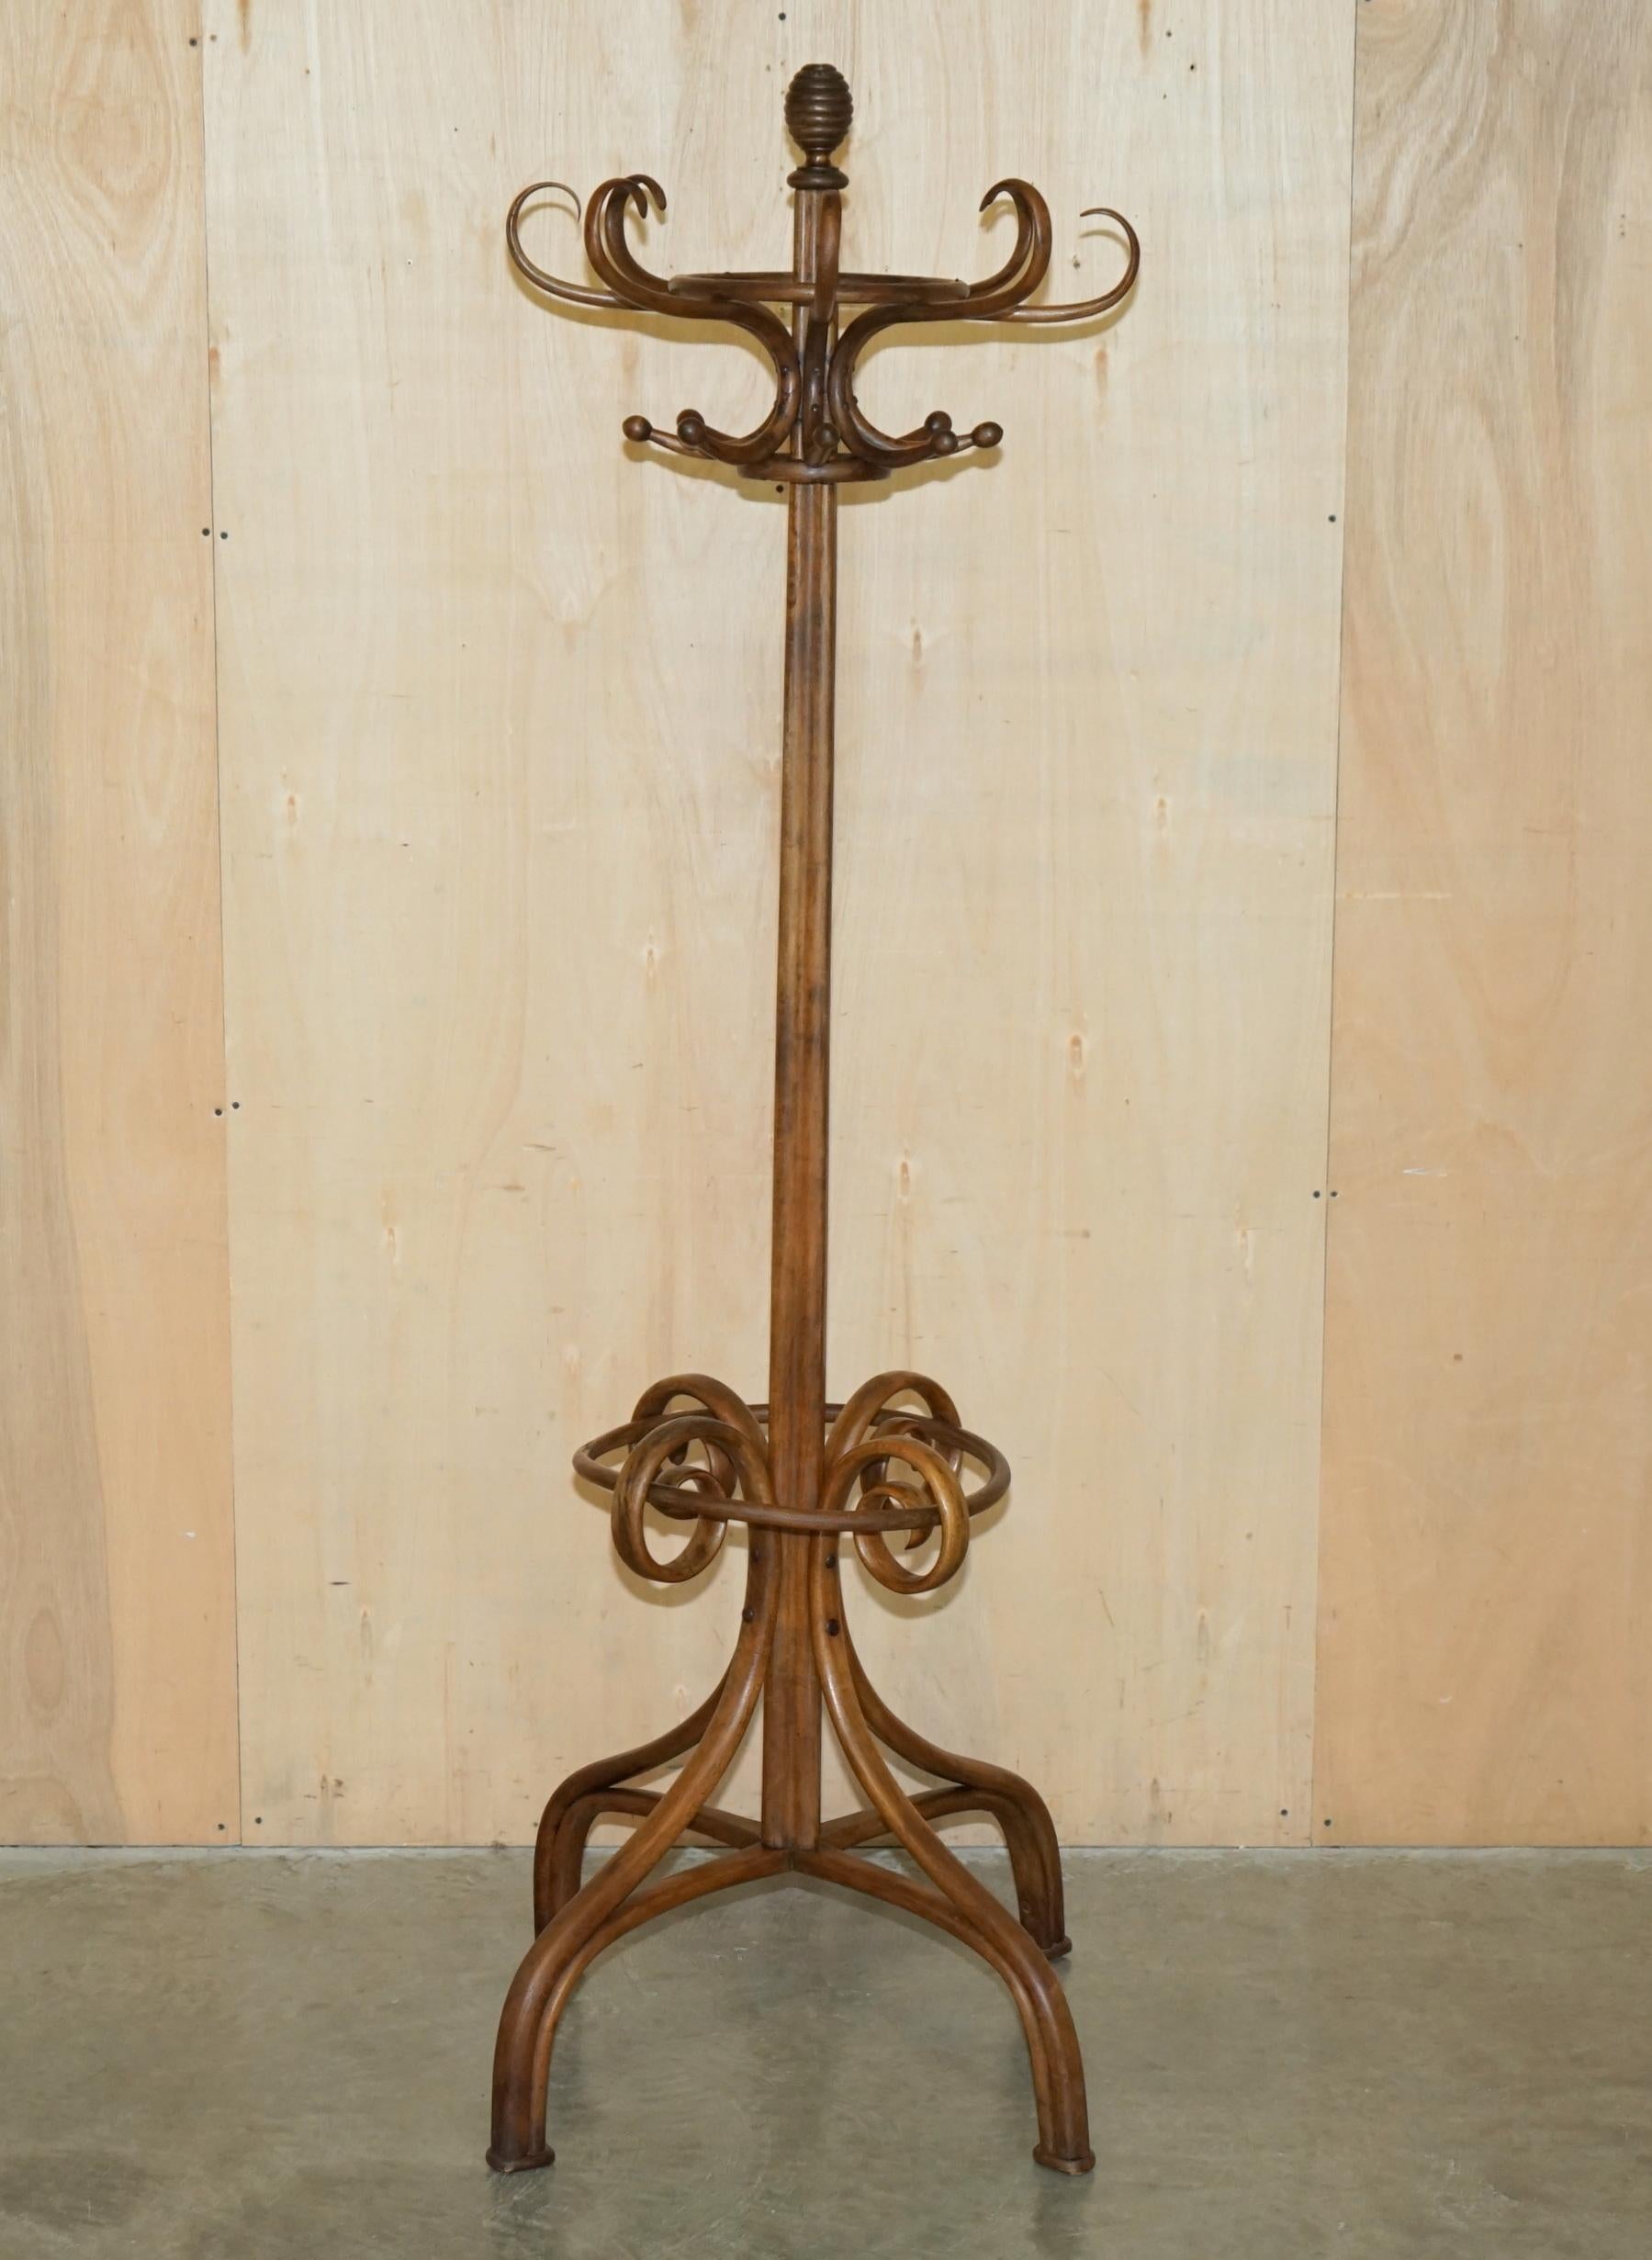 Royal House Antiques

Royal House Antiques is delighted to offer for sale this lovely antique circa 1880 French Thonet bentwood coat rack 

Please note the delivery fee listed is just a guide, it covers within the M25 only for the UK and local